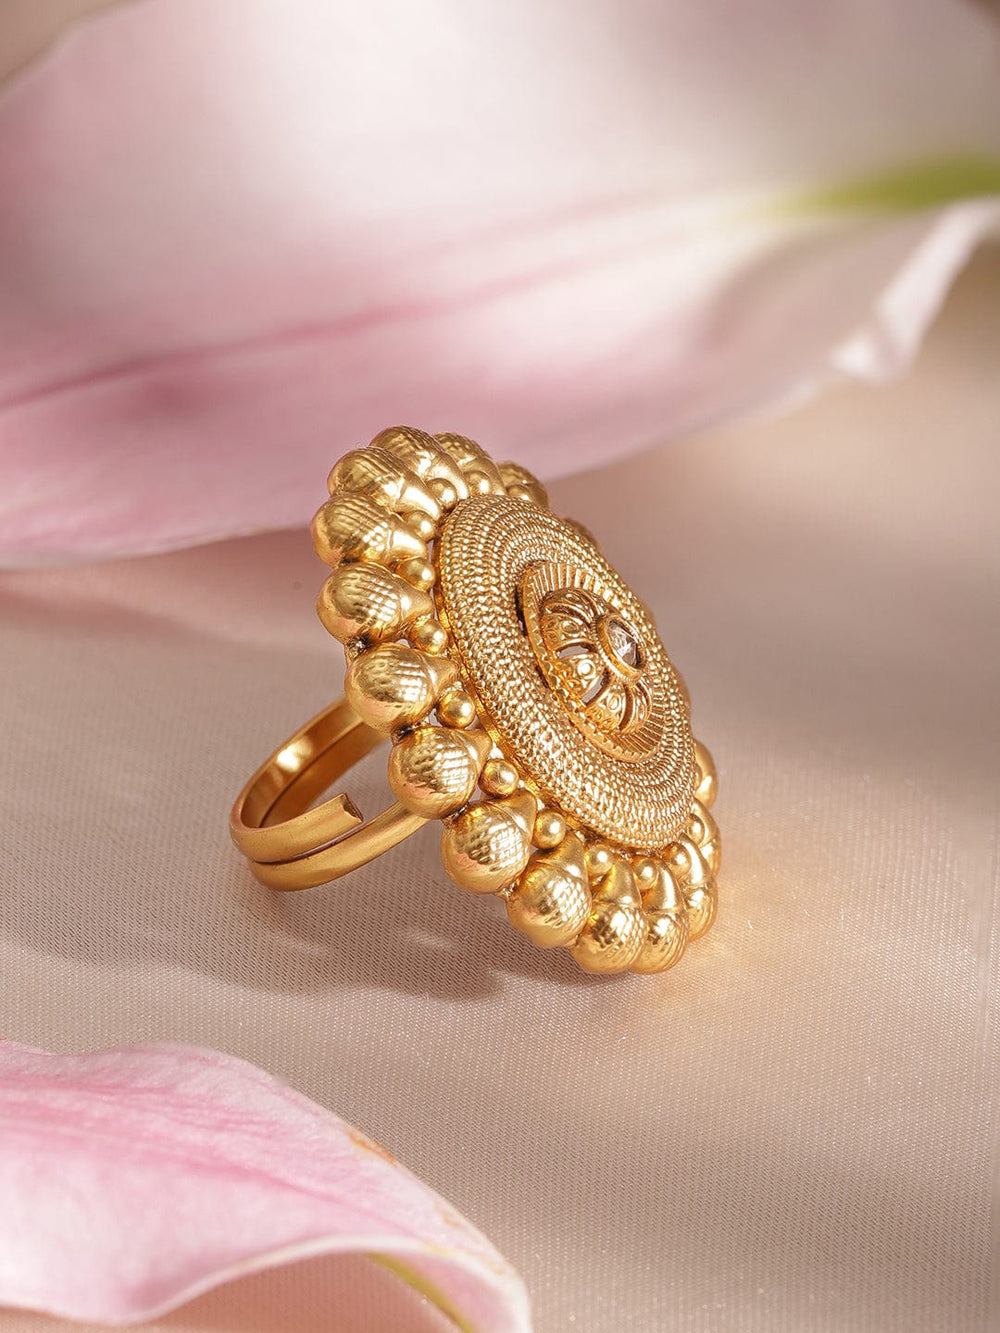 Rubans Opulent Elegance: 22K Gold-Plated Statement Rings for Timeless Style Rings